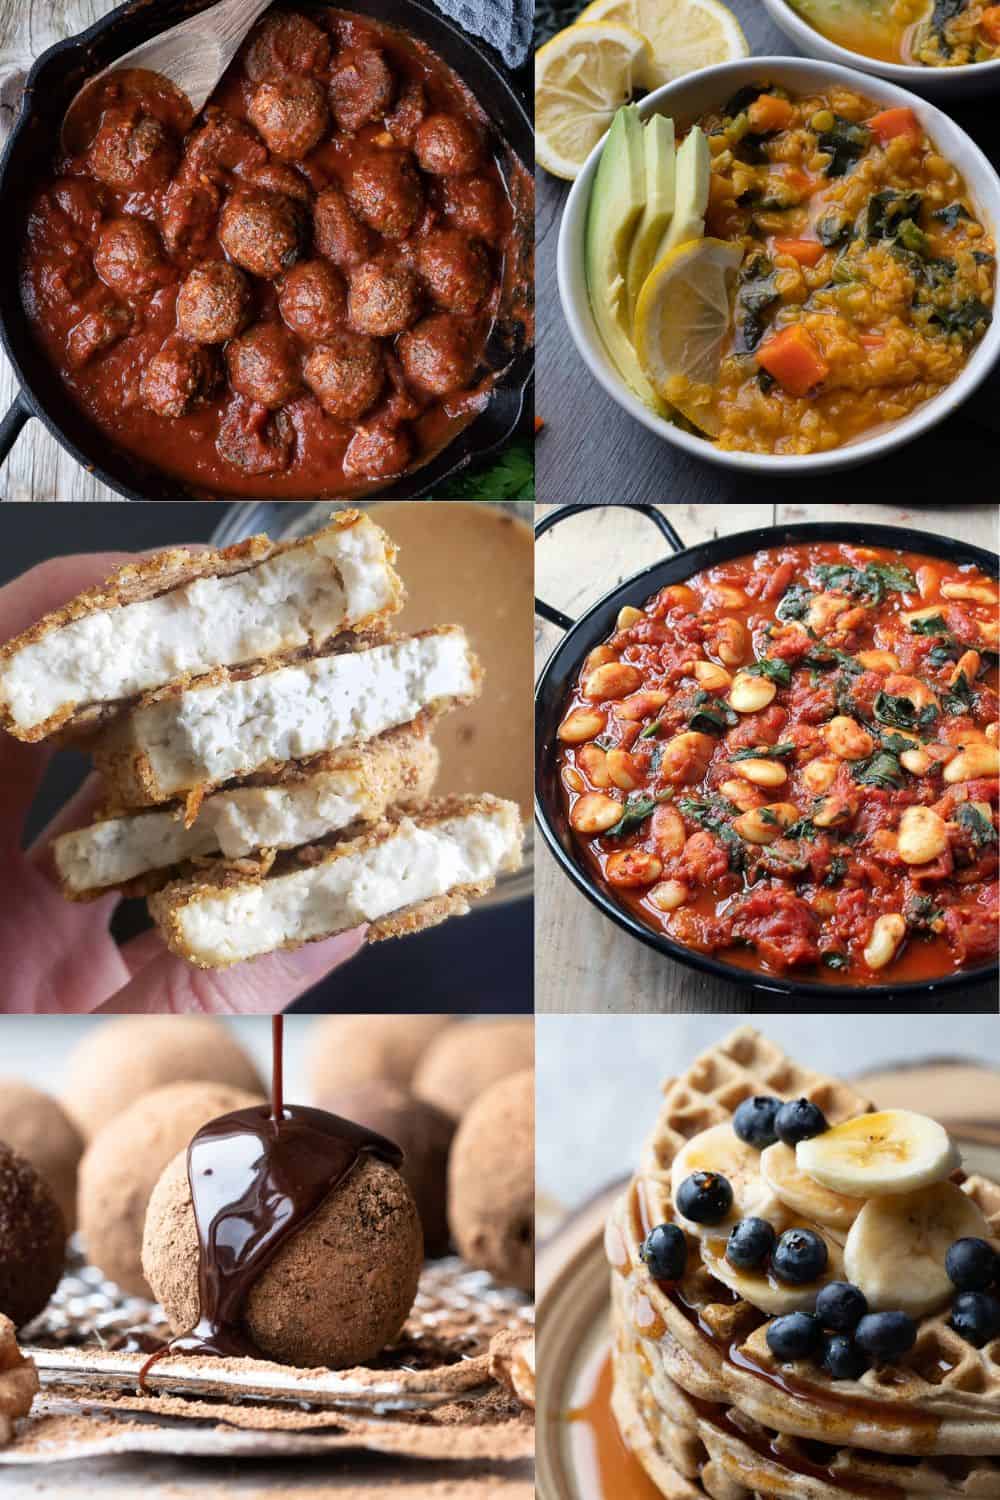 Image of various recipes that can be made with 8 ingredients from the pantry, image is for a recipe roundup post.